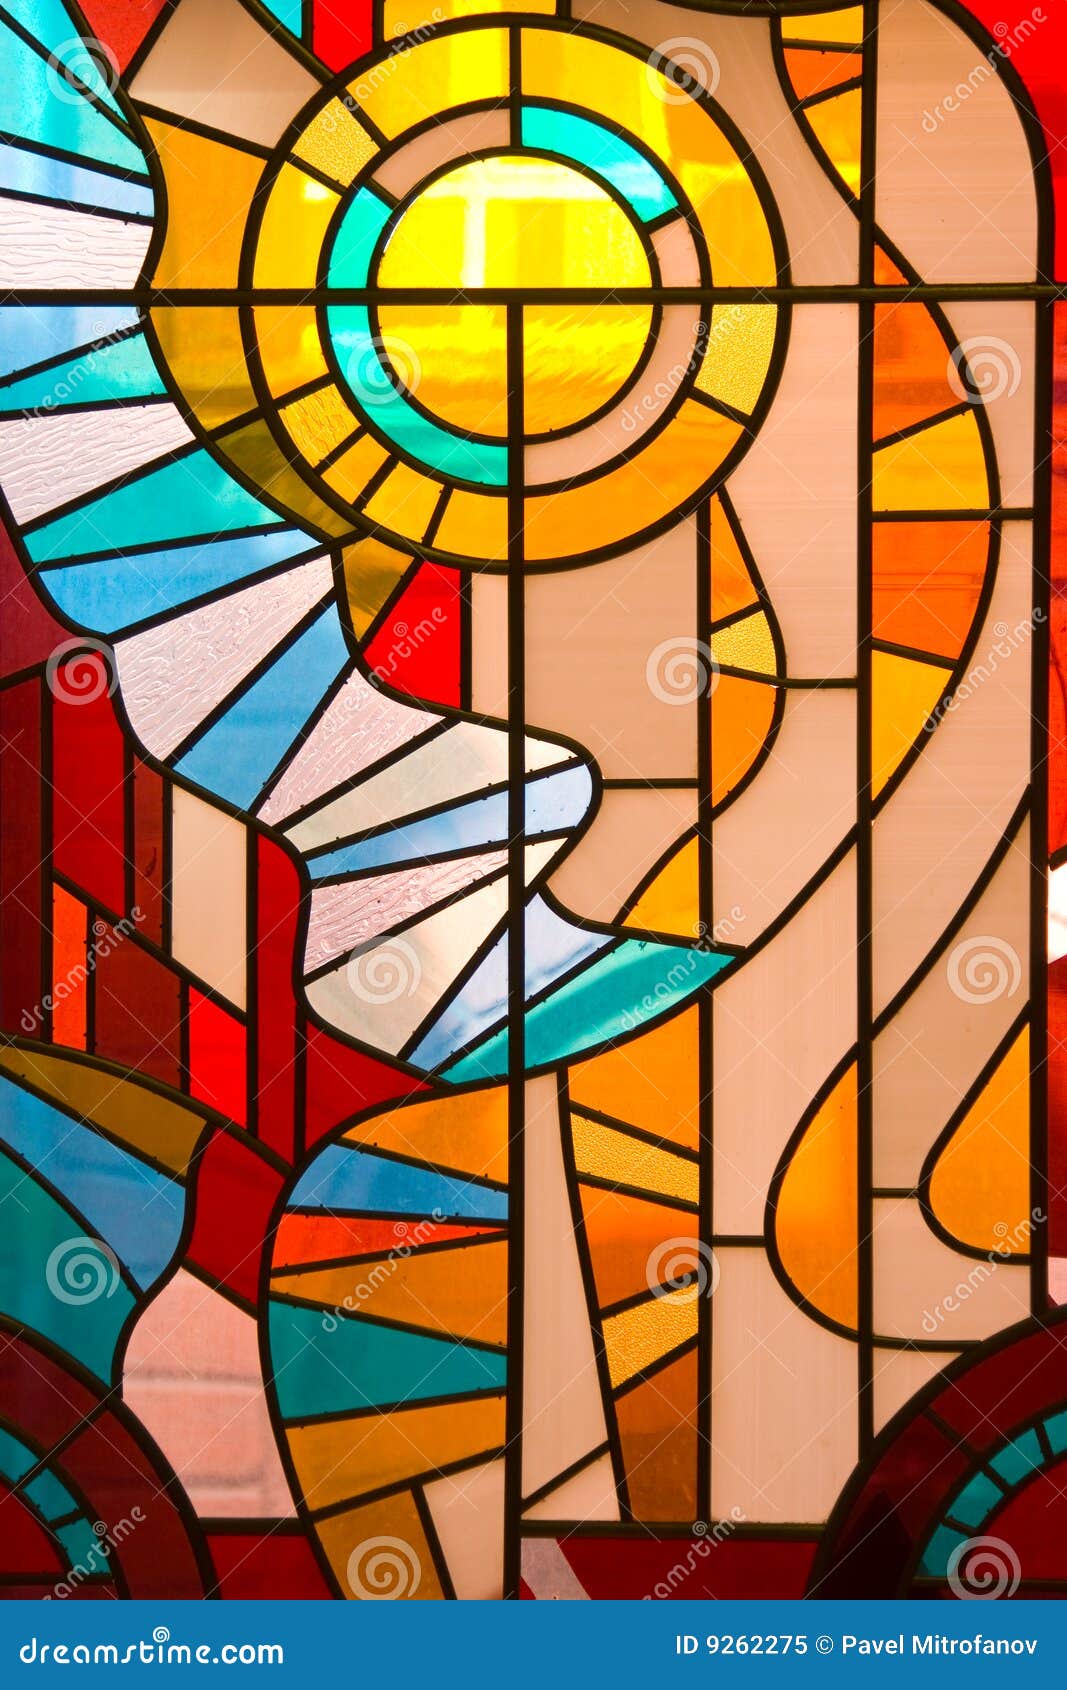 free clipart stained glass window - photo #11